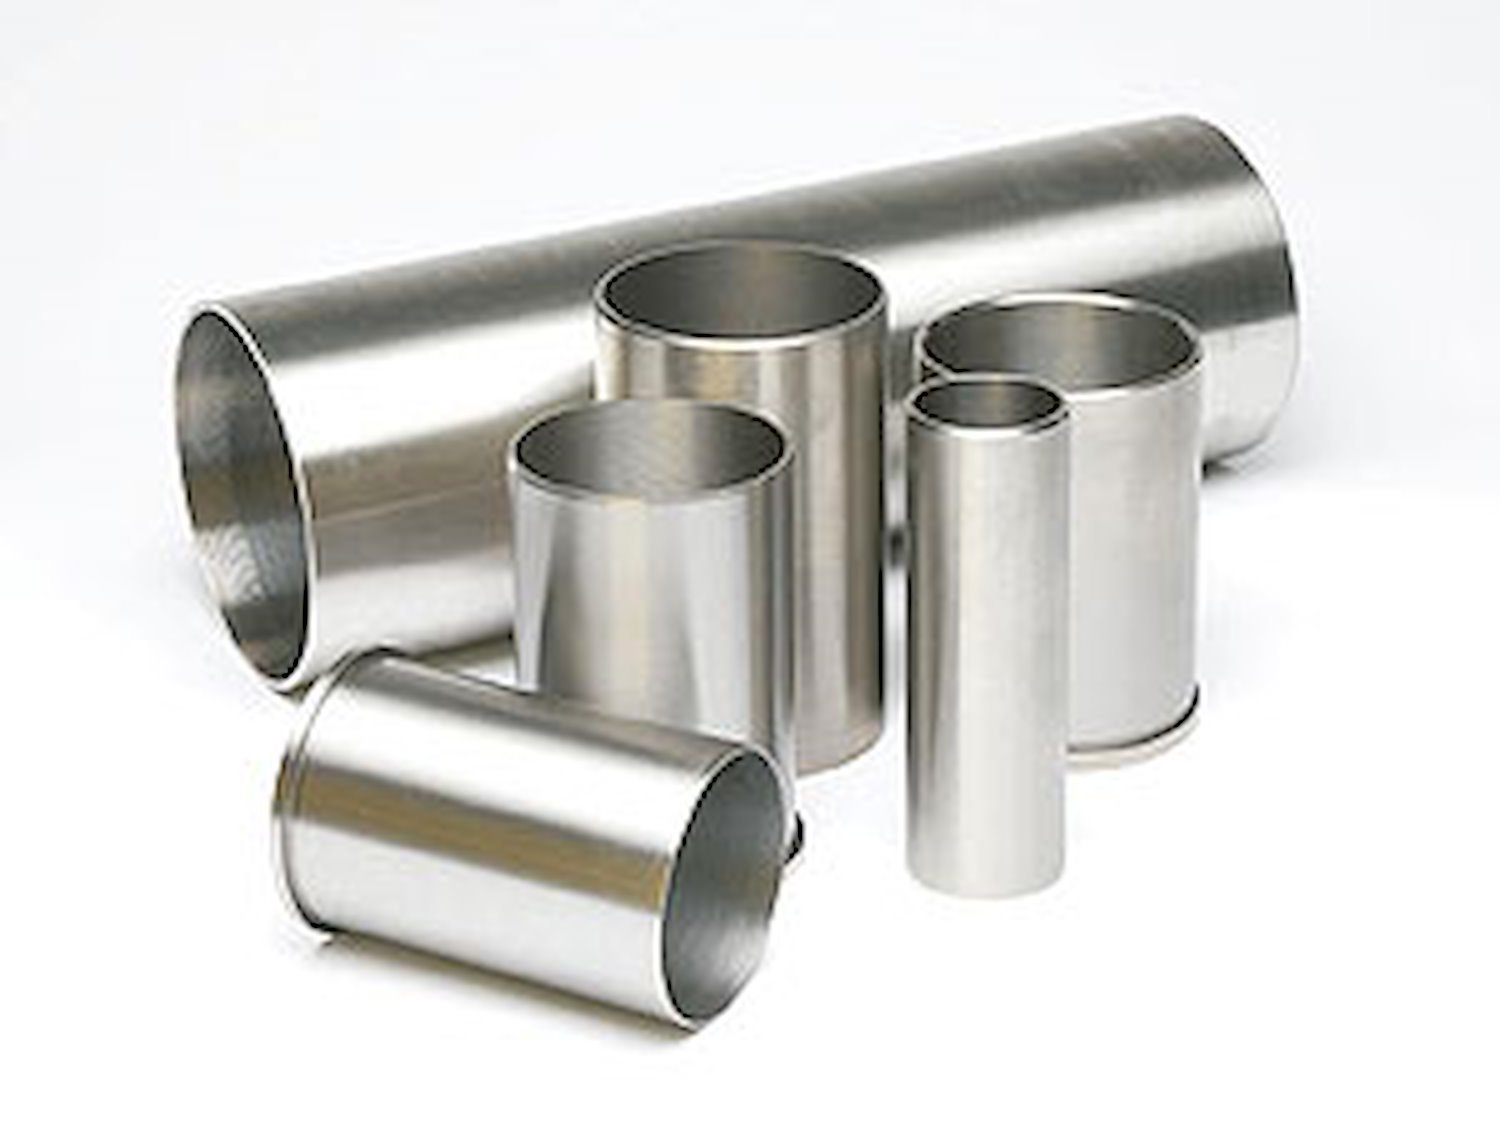 Cylinder Sleeve Bore: 2.9130" Length: 6-1/2" Wall Thickness: 1/8"